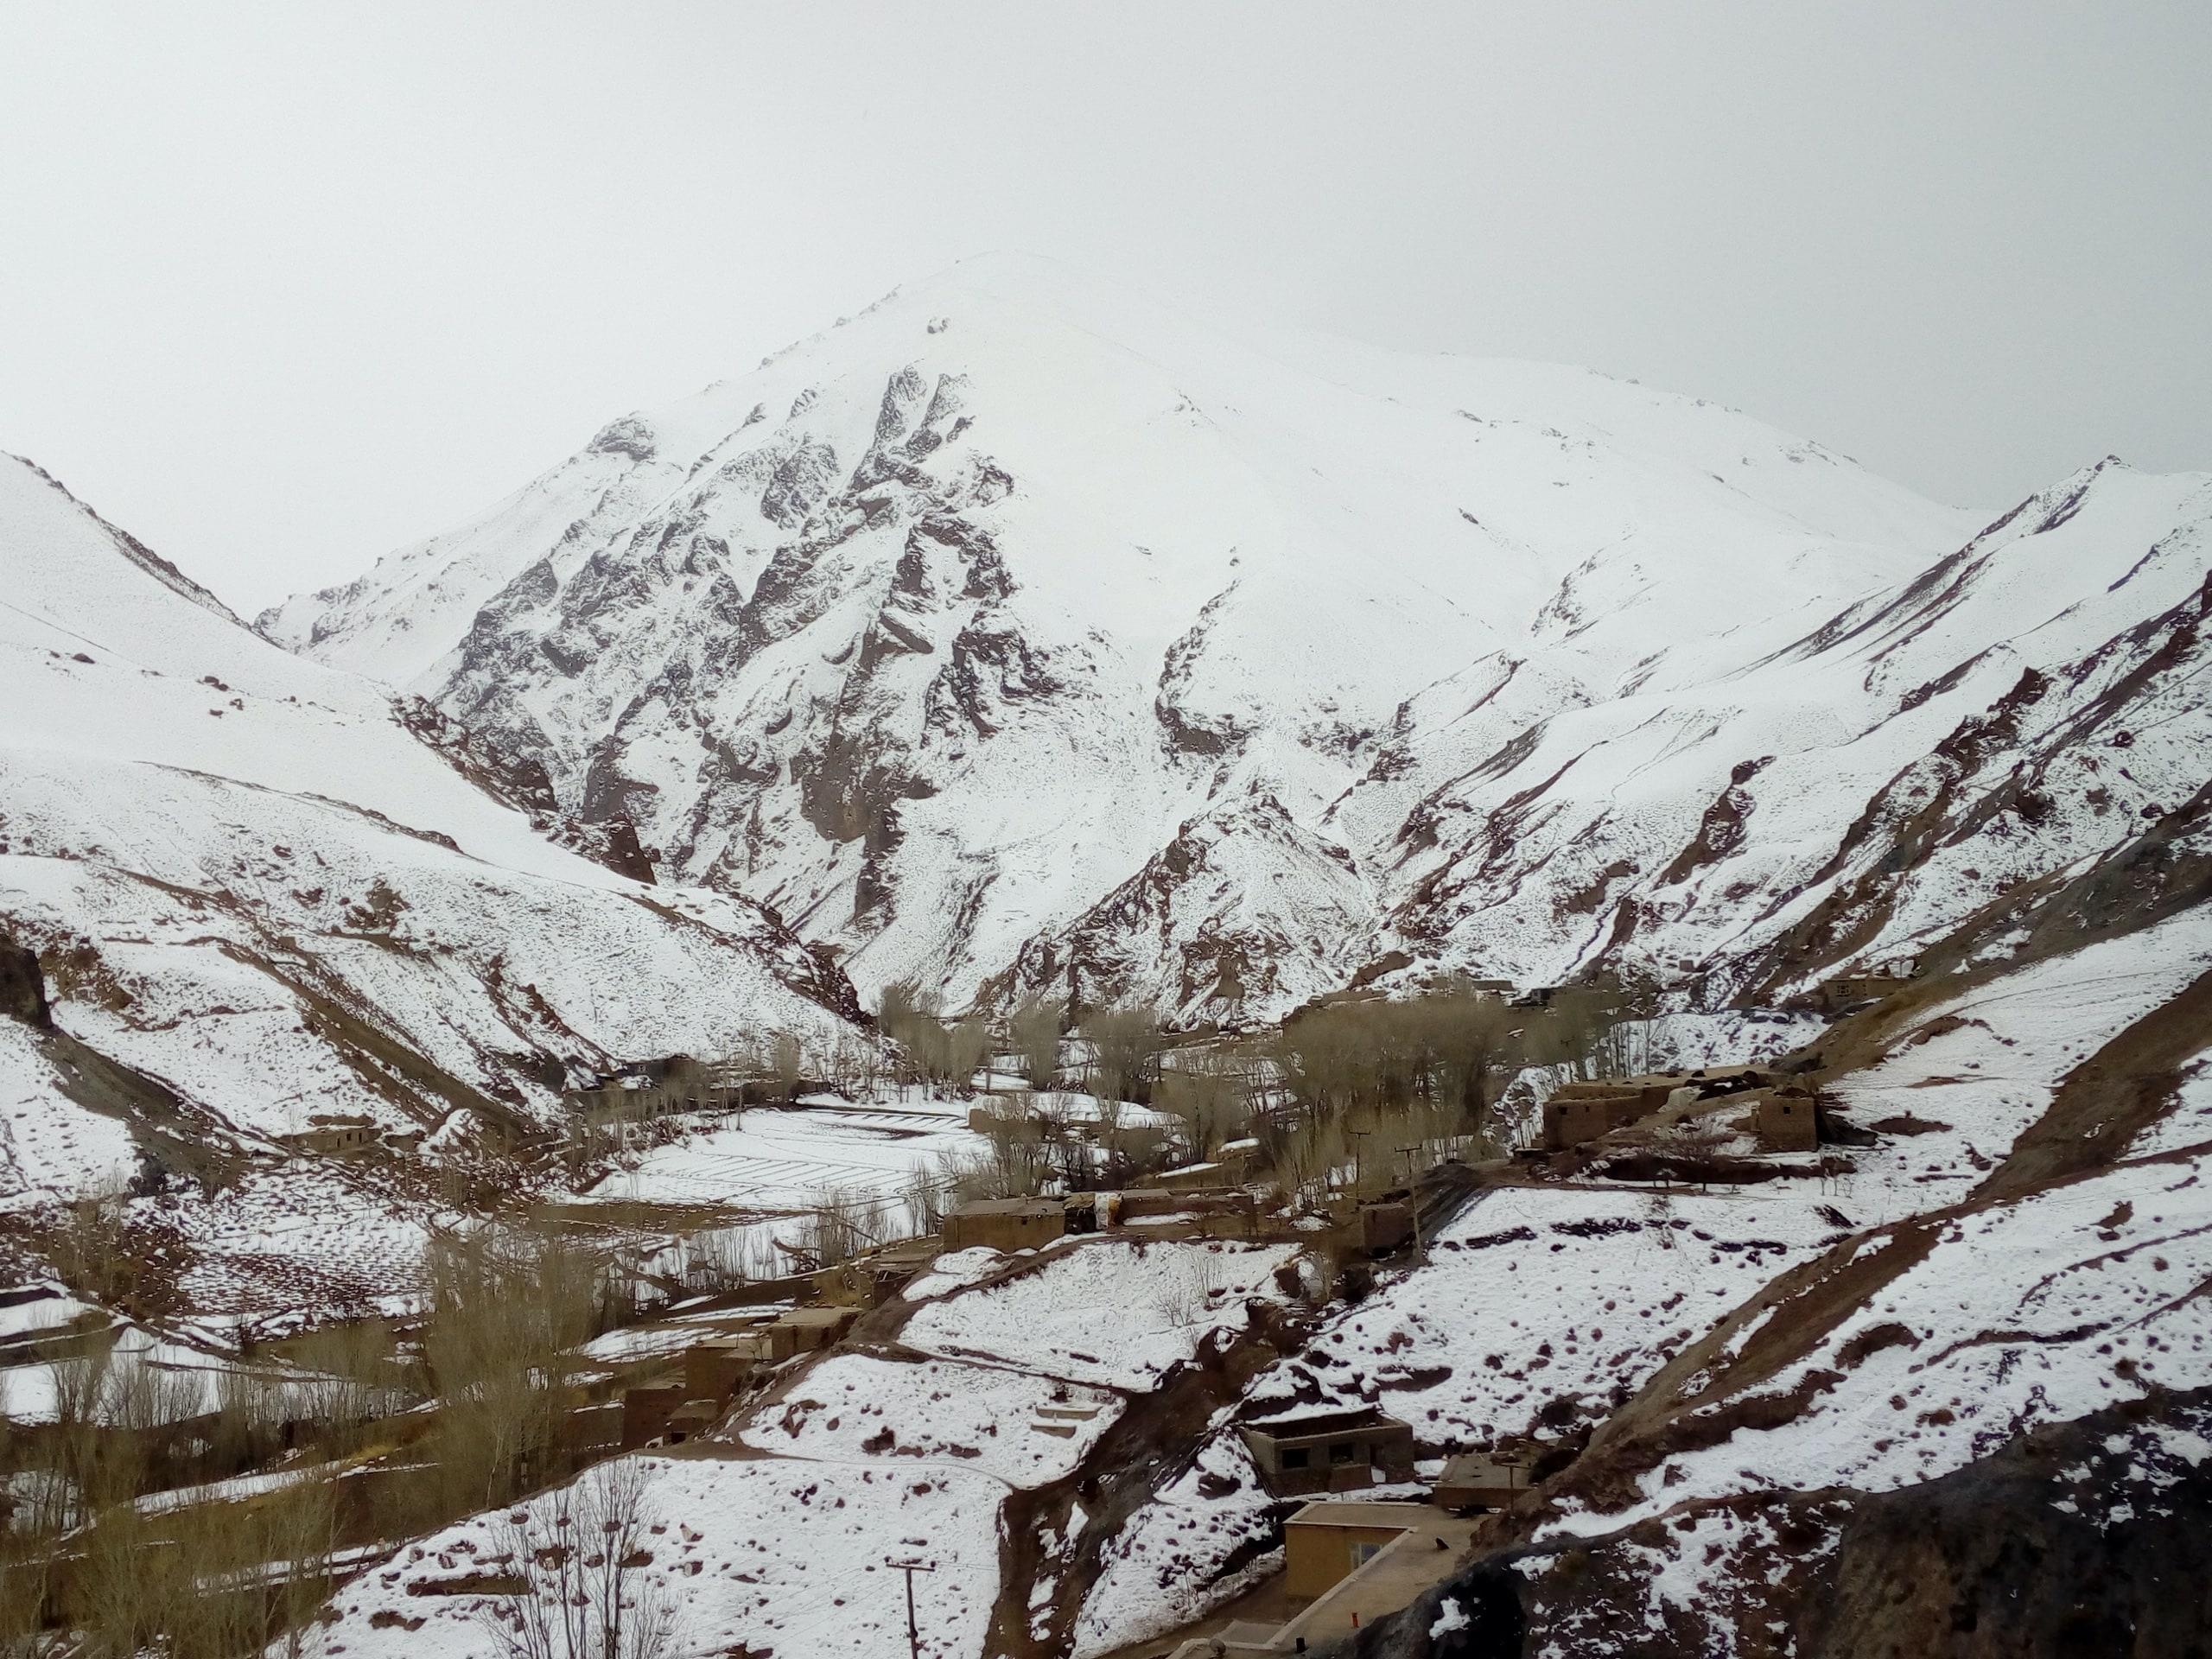 Difficult terrain and conditions in north-east Afghanistan to build up a transmission network.